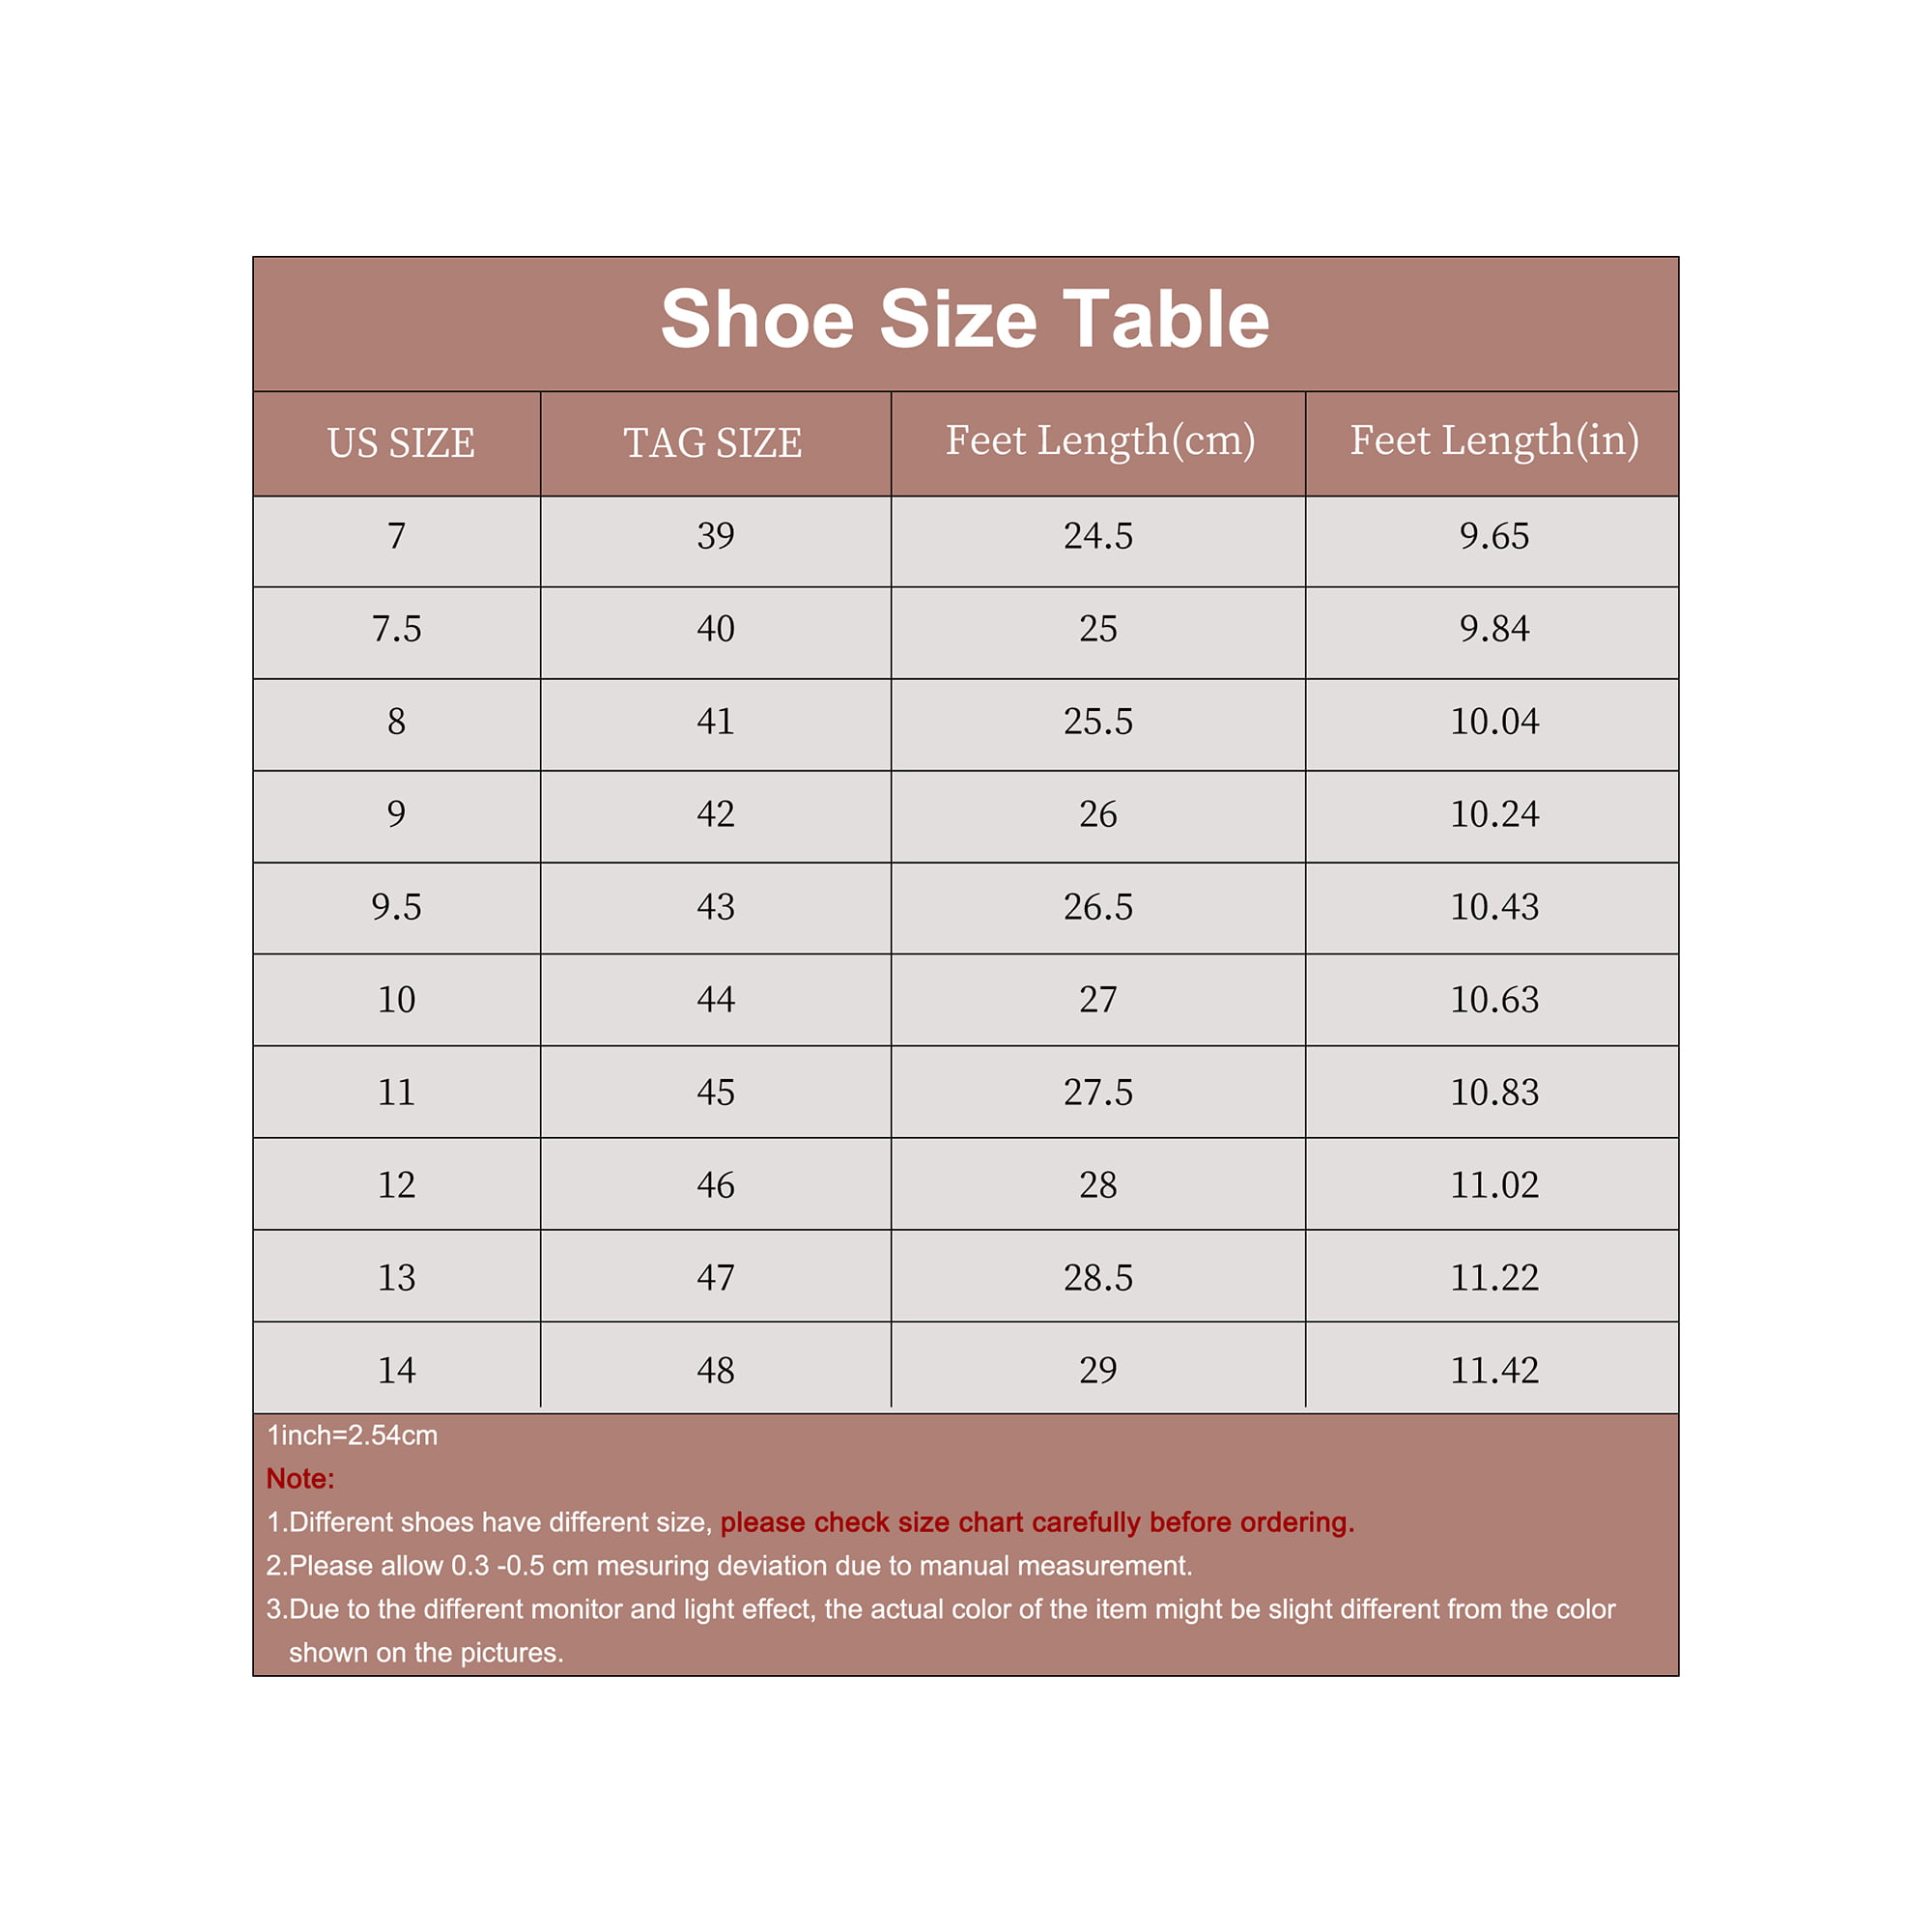 Louis Vuitton Shoe Size Chart: Are They True to Size?